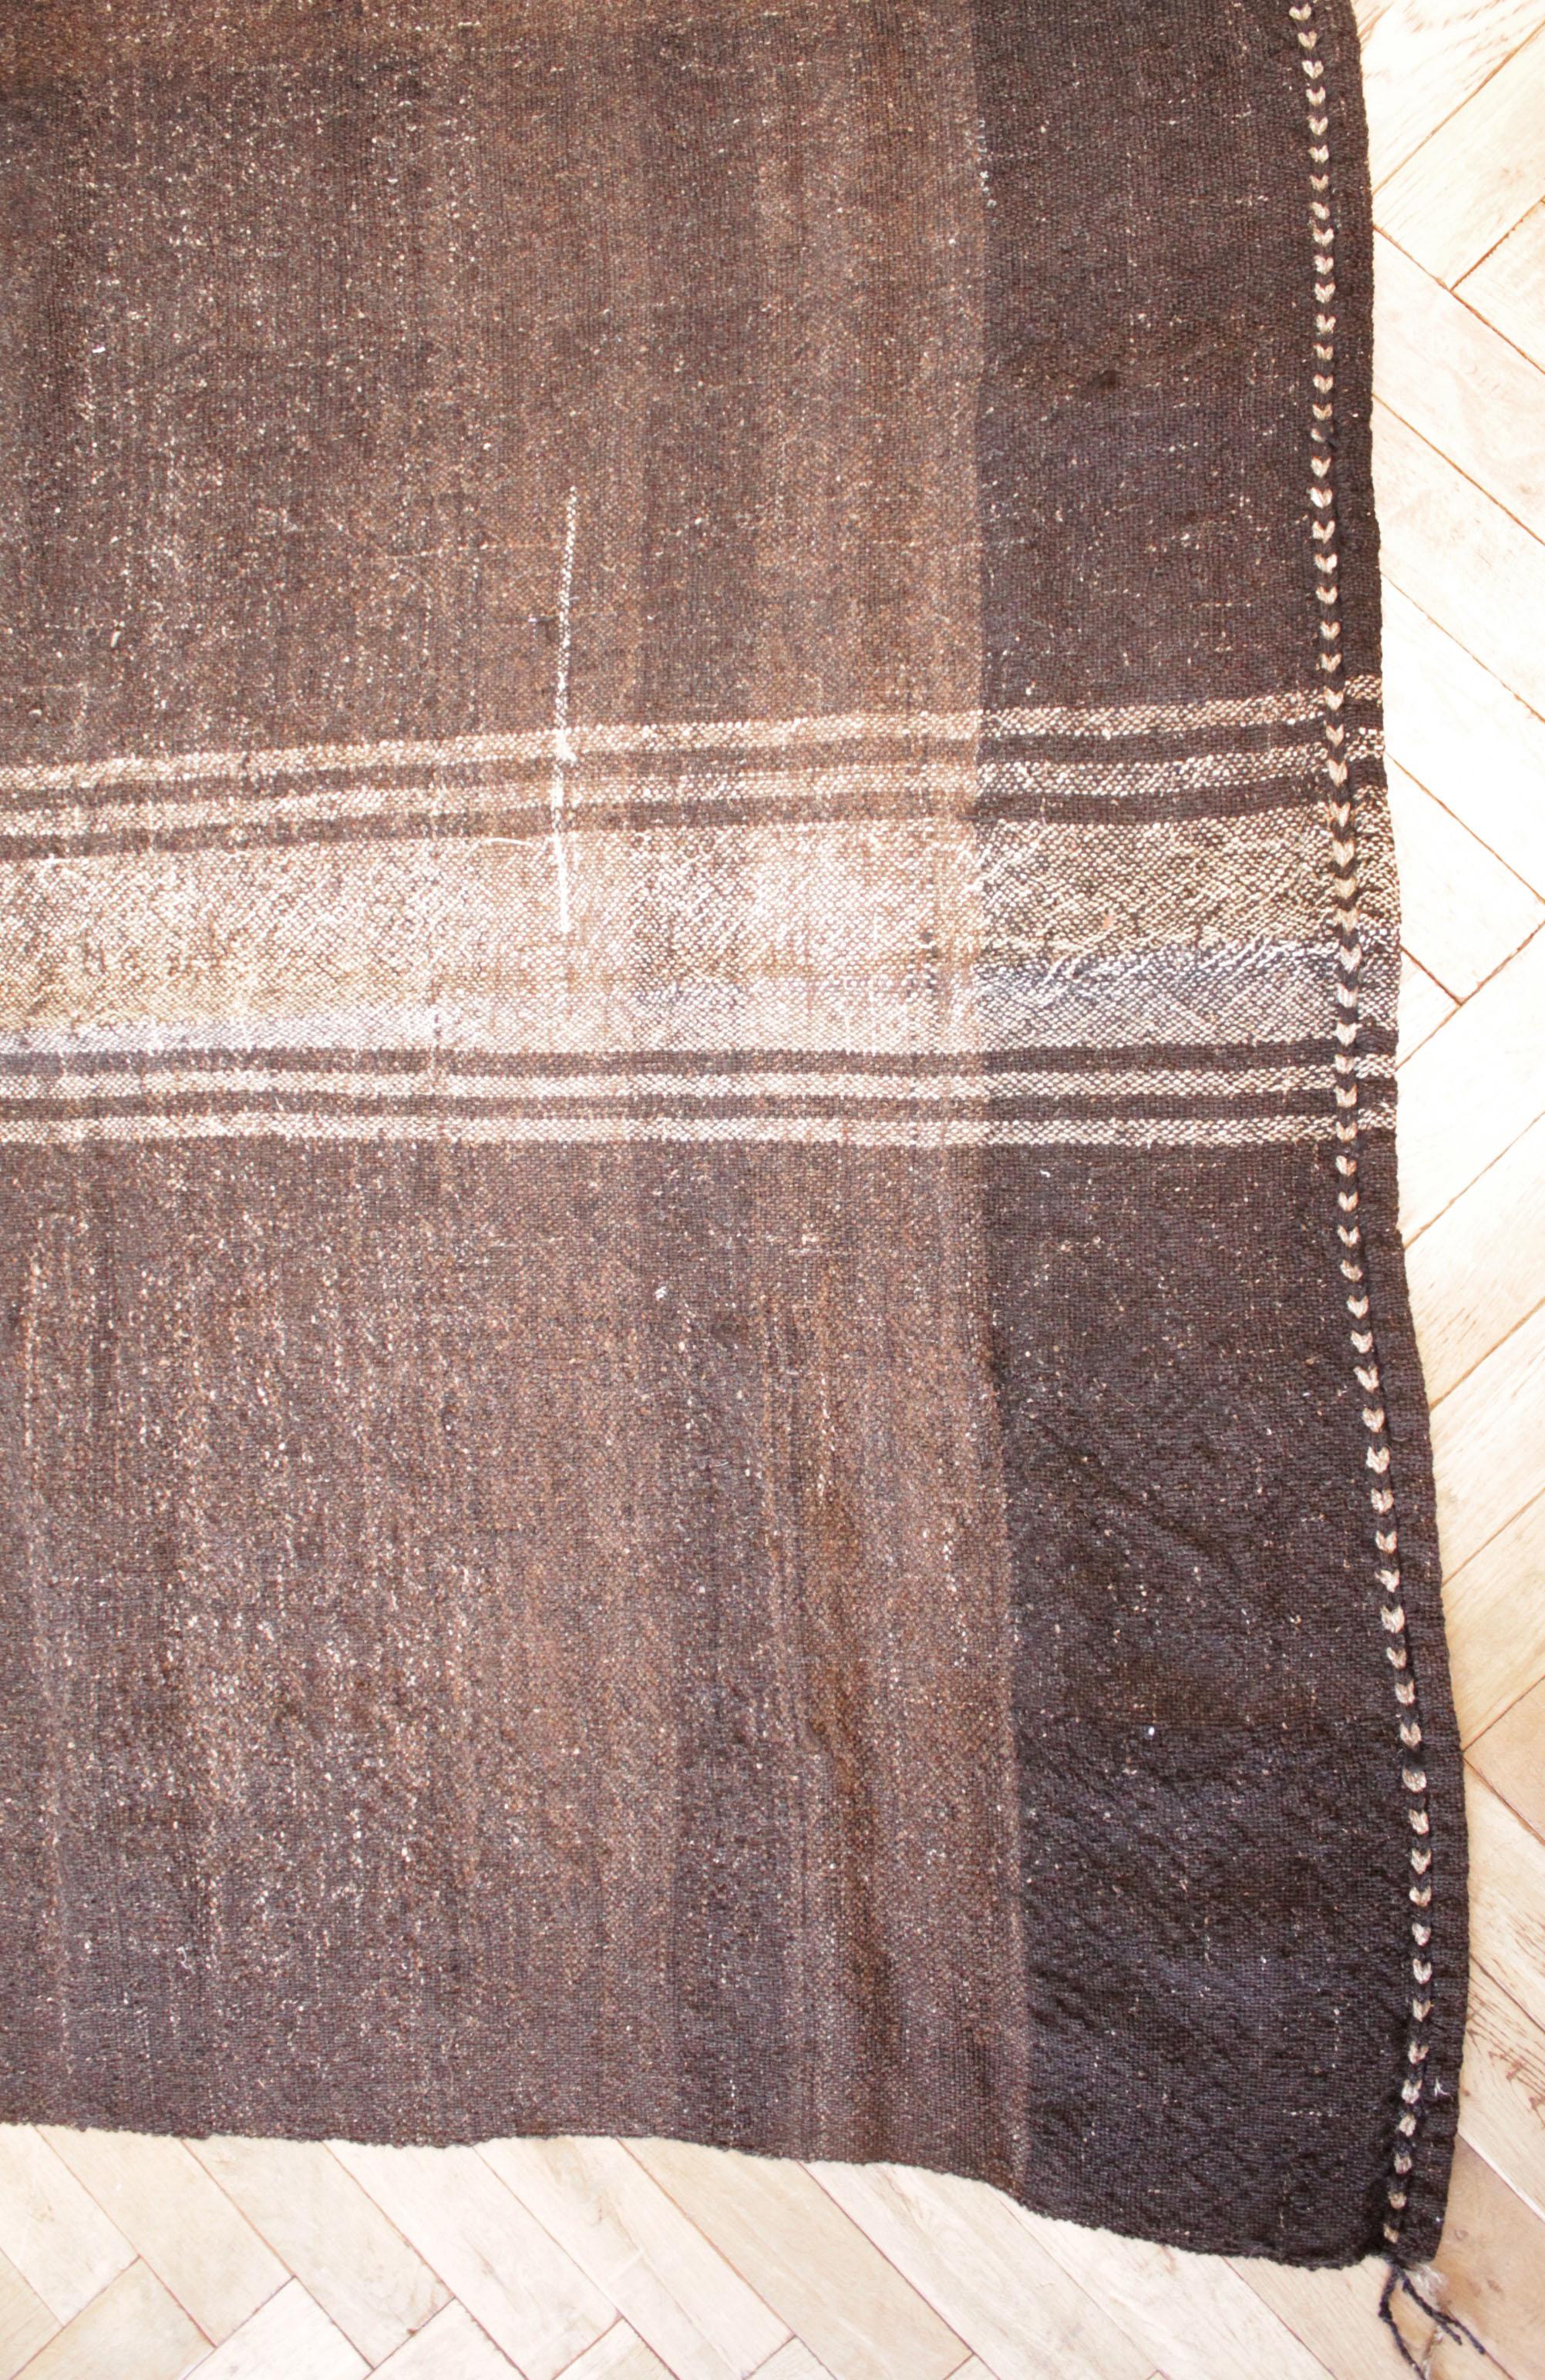 The Bradley rug
Vintage Turkish rug in brown with light natural stripes.
Our latest collection has arrived from Turkey, these are great to use as a rug, or let us create a custom ottoman for your out of this piece. If you love this stripe and